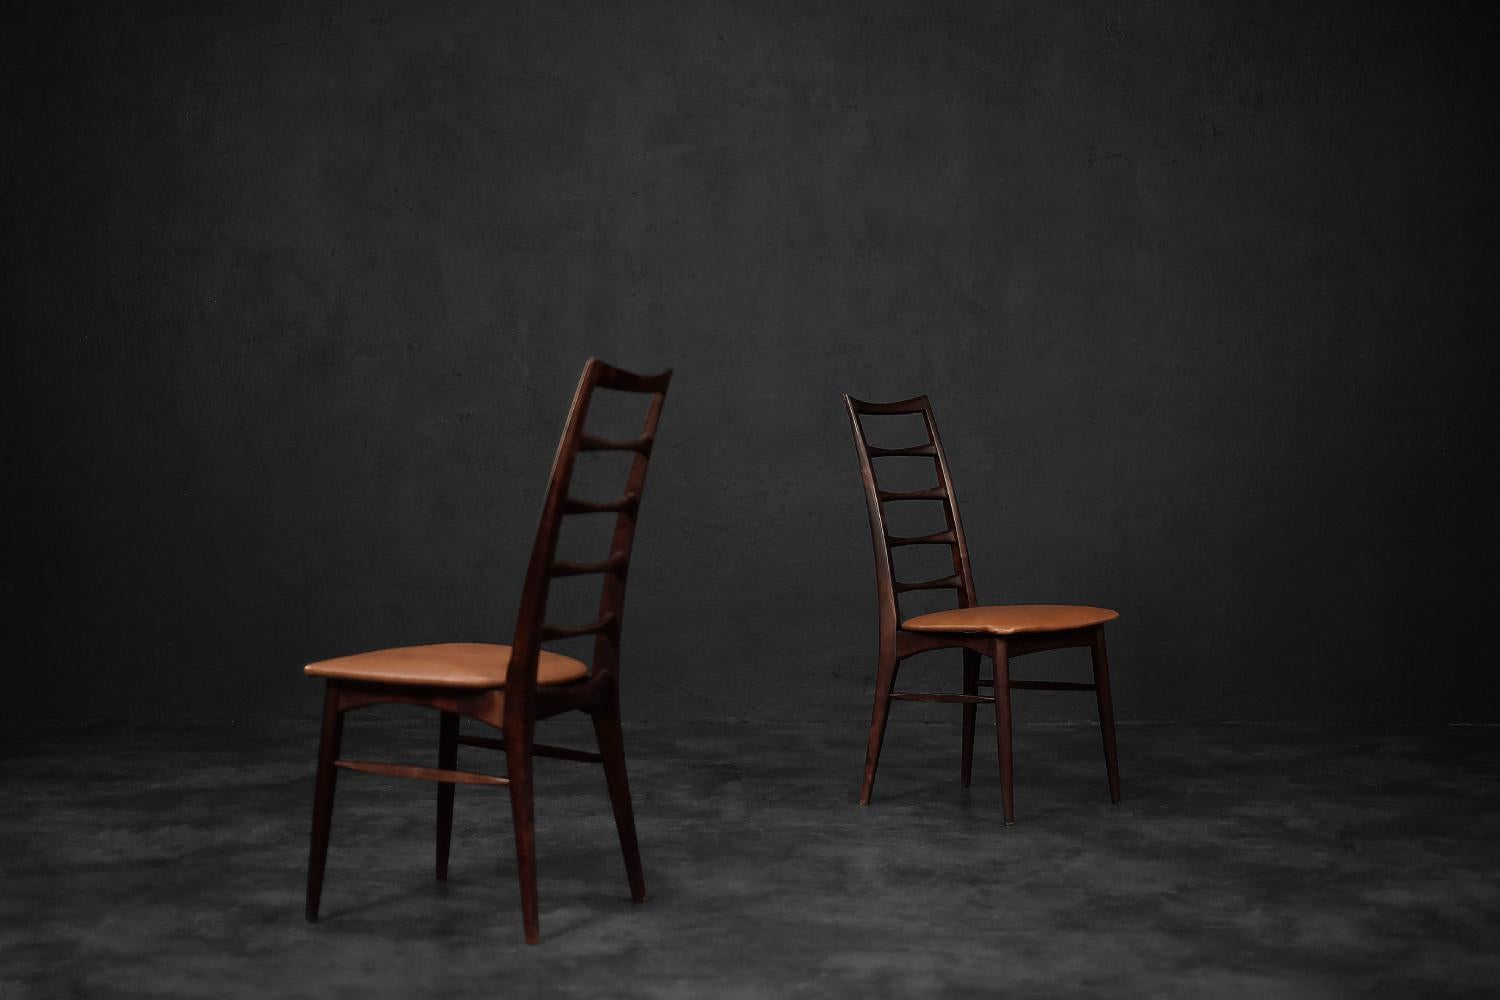 This set of two modernist chairs from the Lis series was designed by Niels Koefoed for the Danish manufacturer Koefoed Hornslet in 1961. The chairs are made of dark, noble rosewood. The upholstery is made of high-quality brown leather. They were